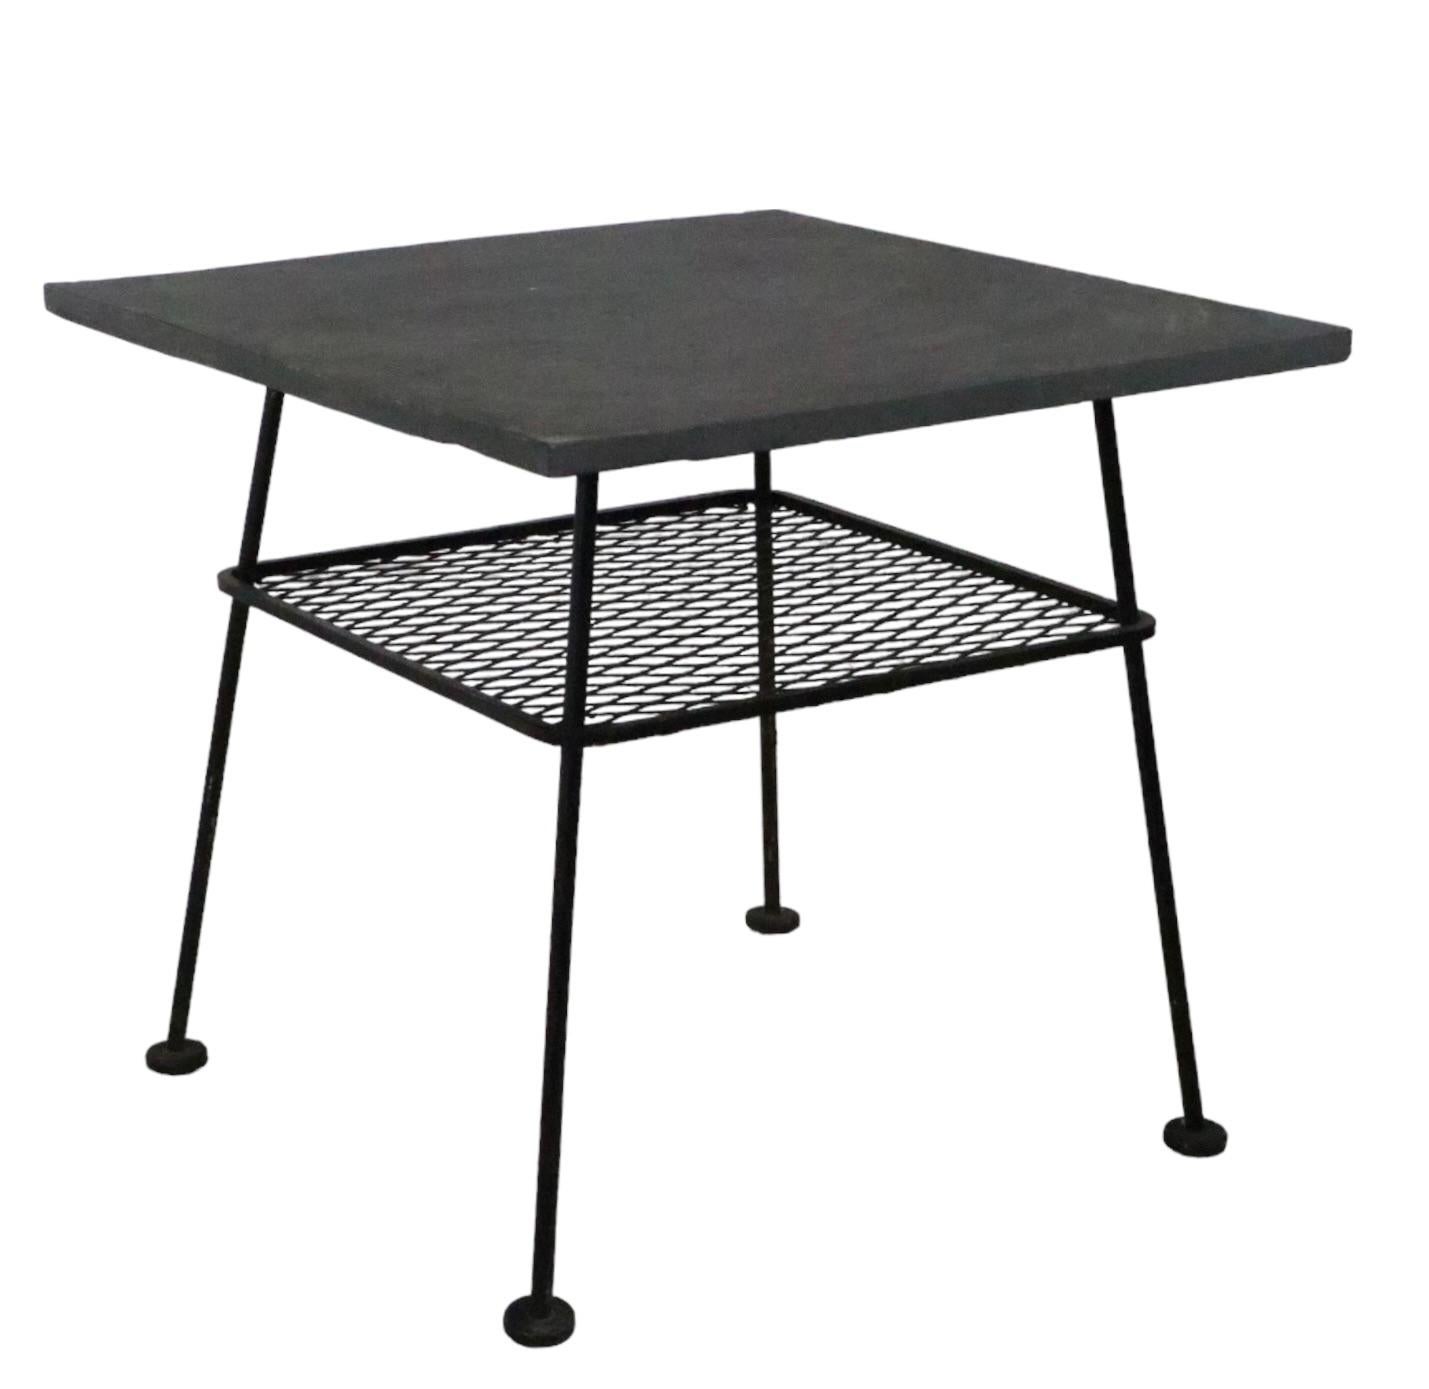 Wrought Iron and Slate Garden Patio, Sunroom Table After McCobb, Woodard, 1950s For Sale 3